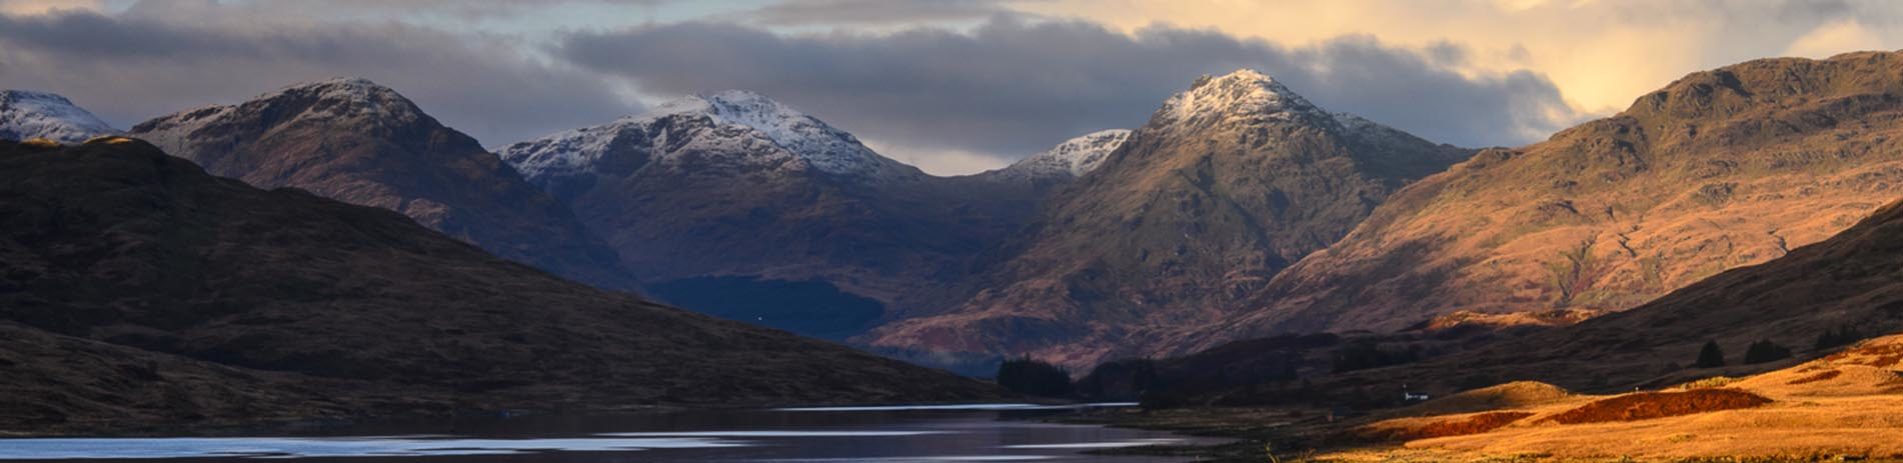 loch-arklet-at-sunset-with-arrochar-alps-covered-by-snow-in-the-distance